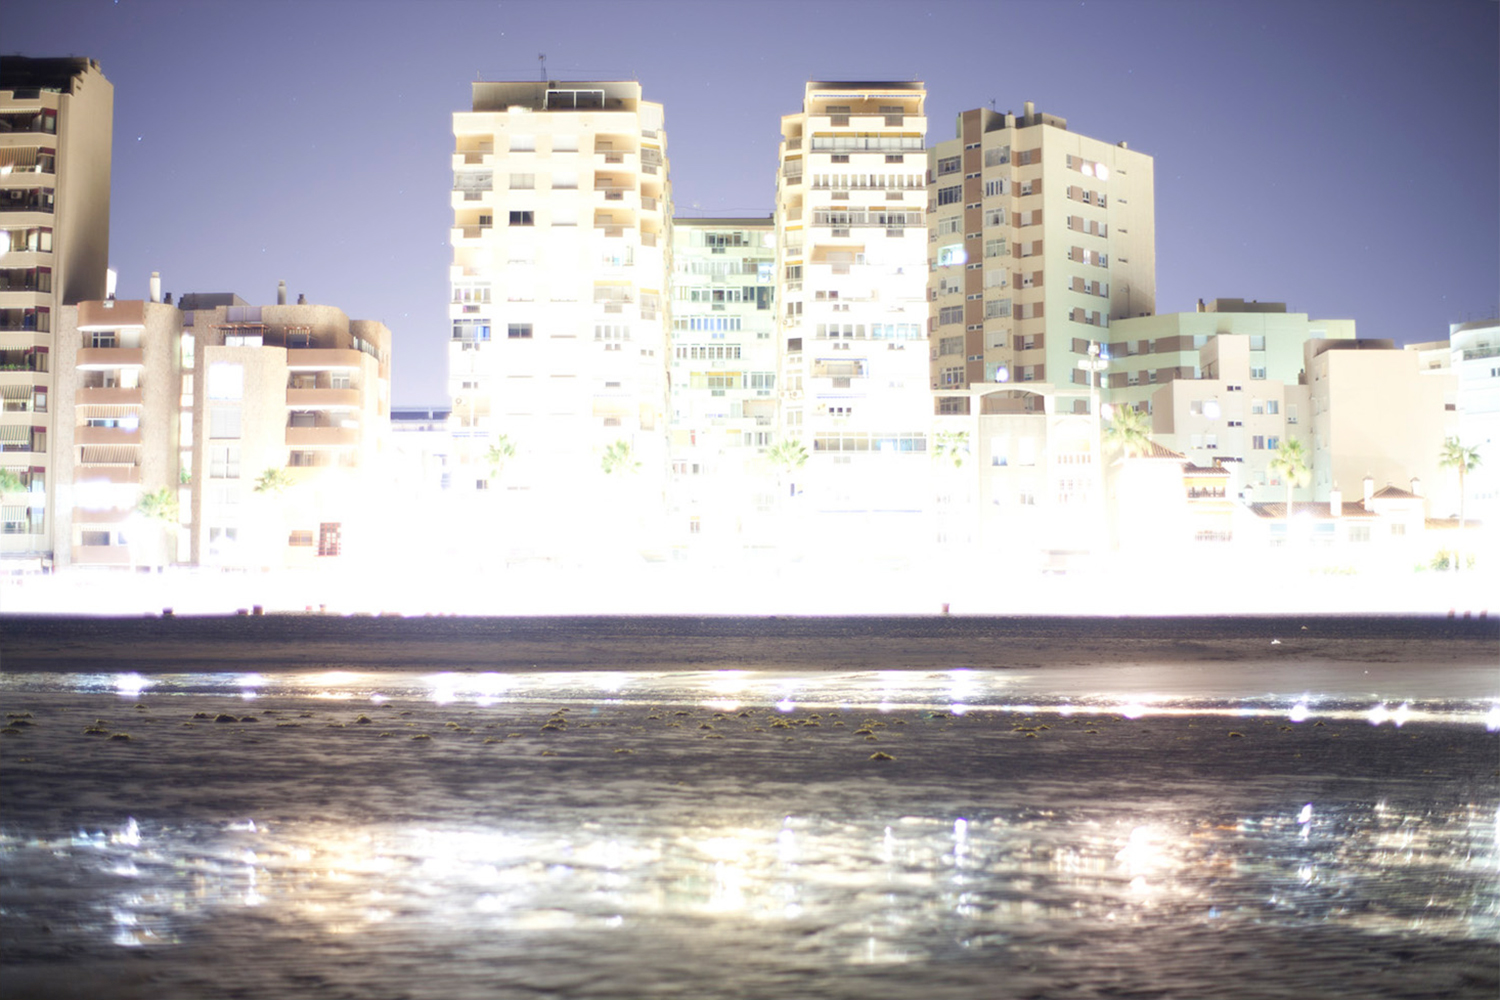 Night sea and buildings photograph in Cadiz by Victor Hugo Martin